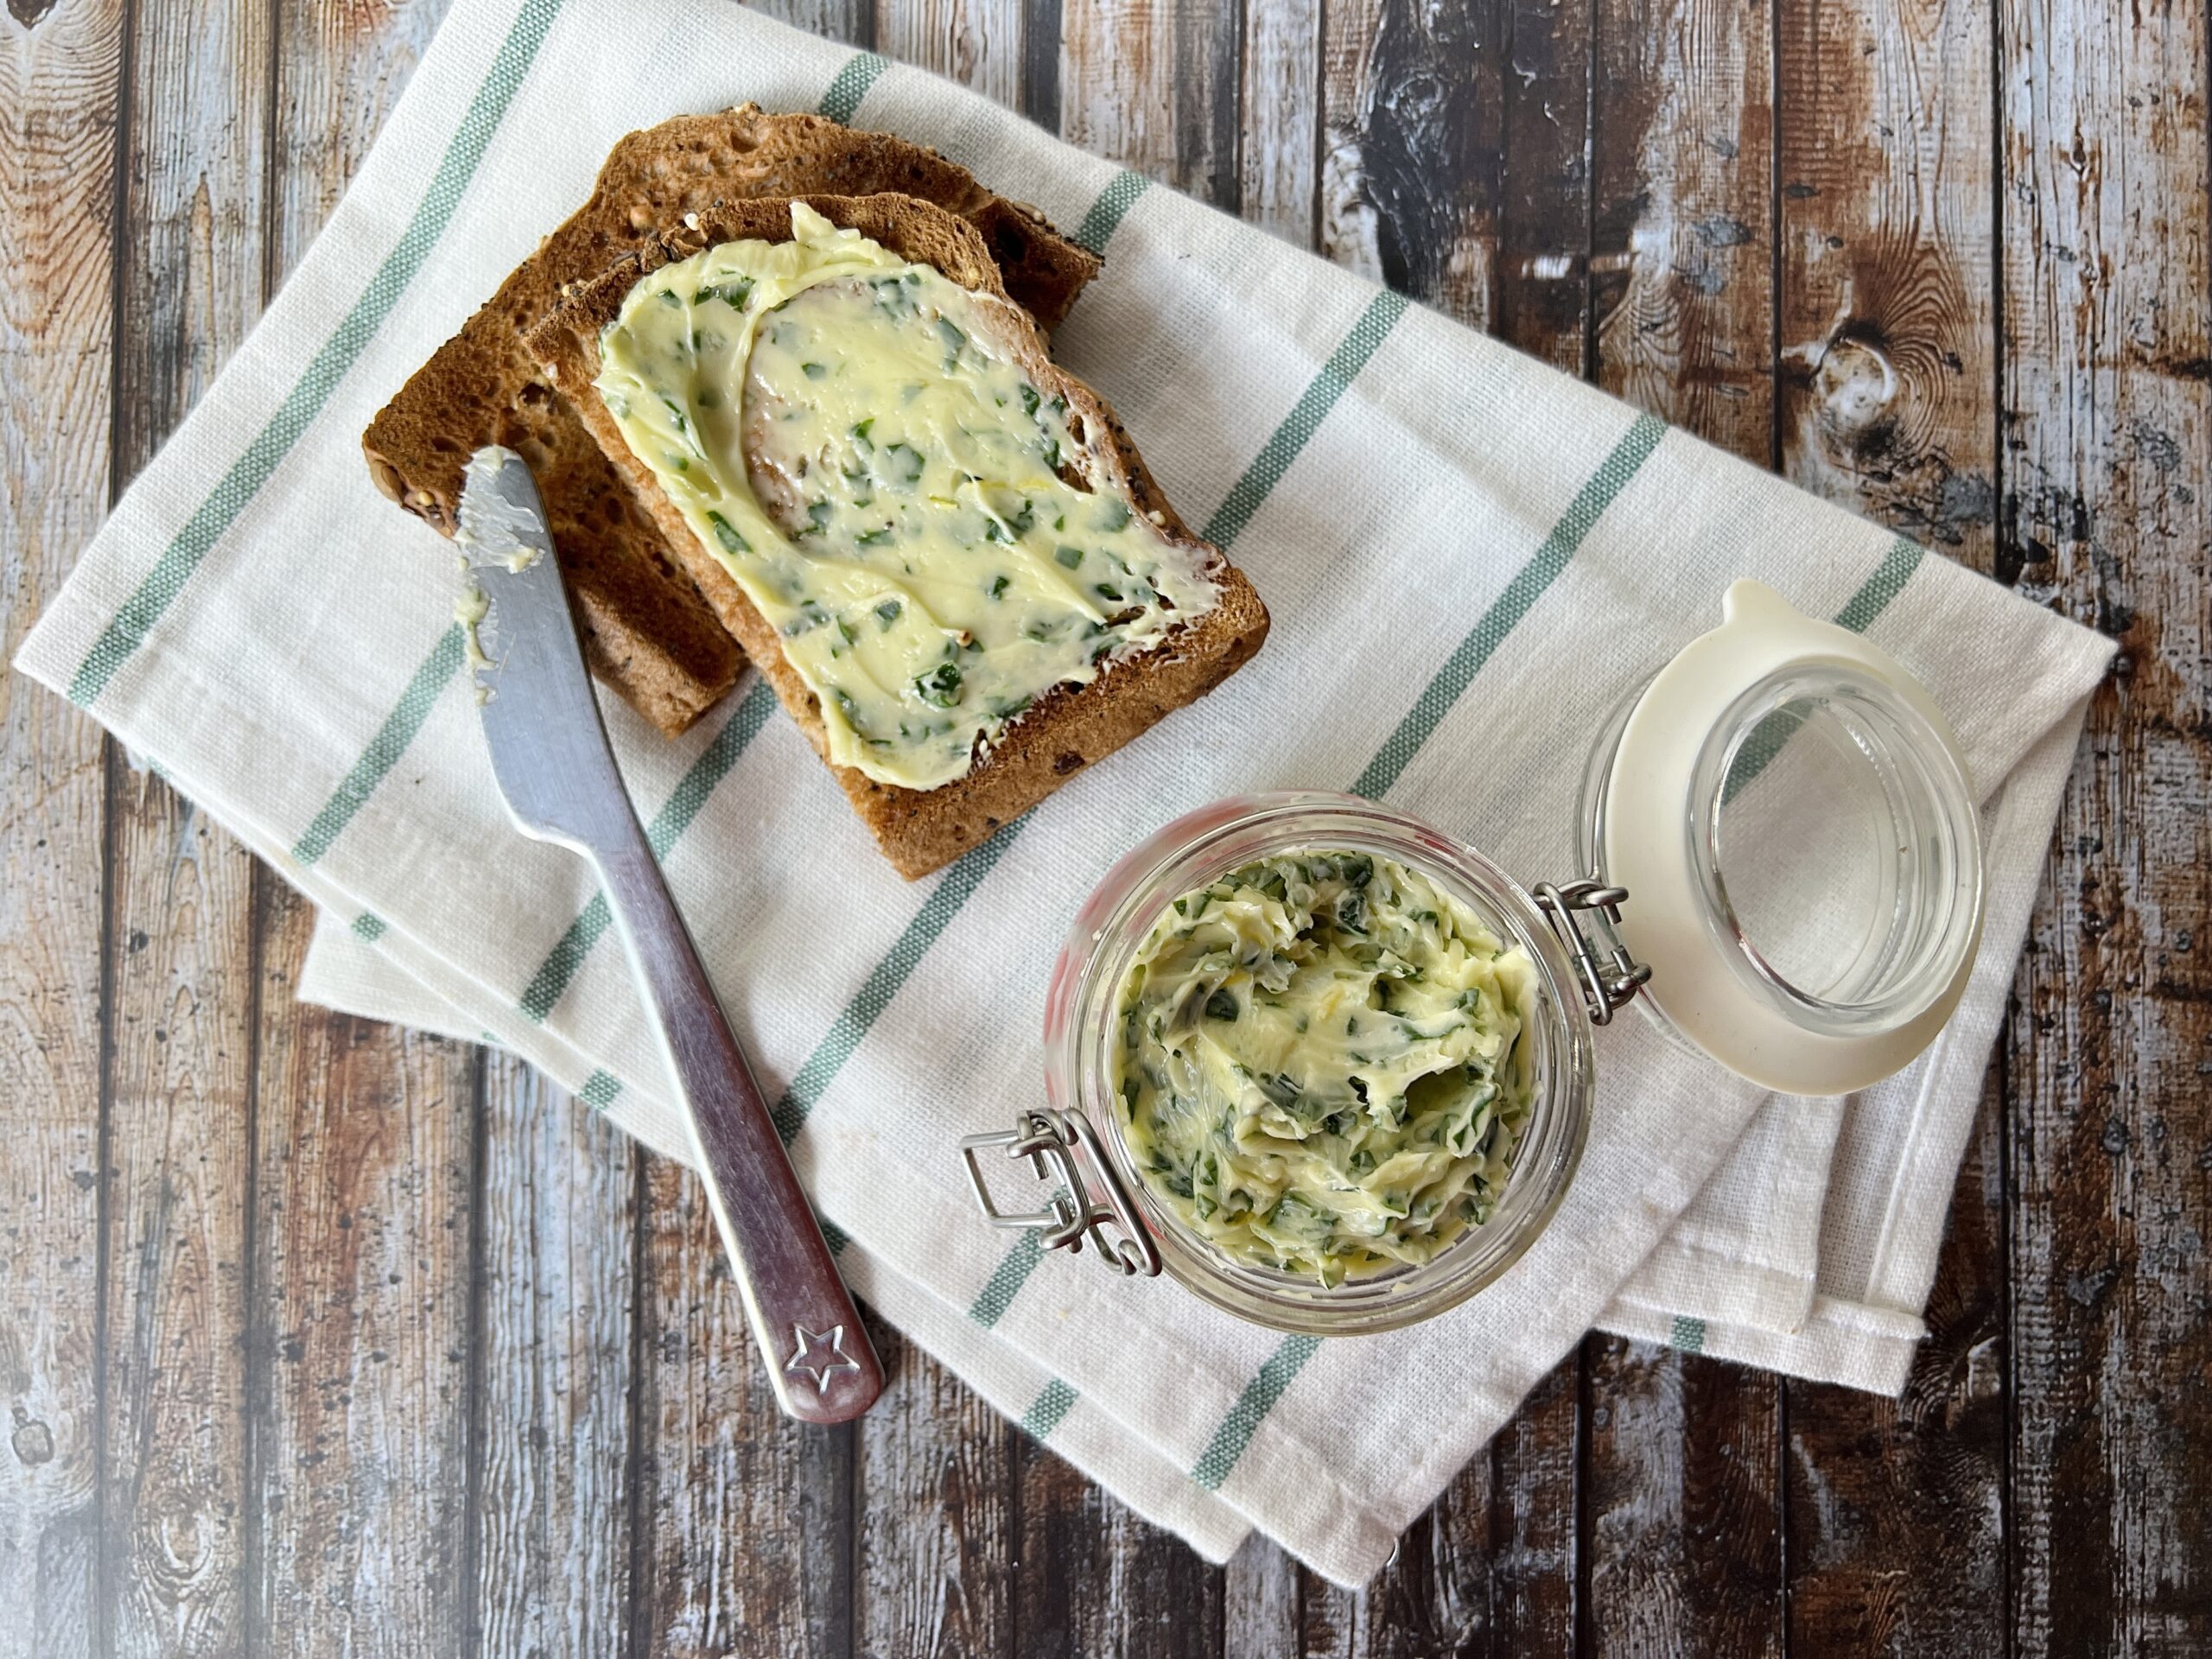 A tea towel with a jar of wild garlic butter on top of it, alongside two slices of toast with garlic butter.